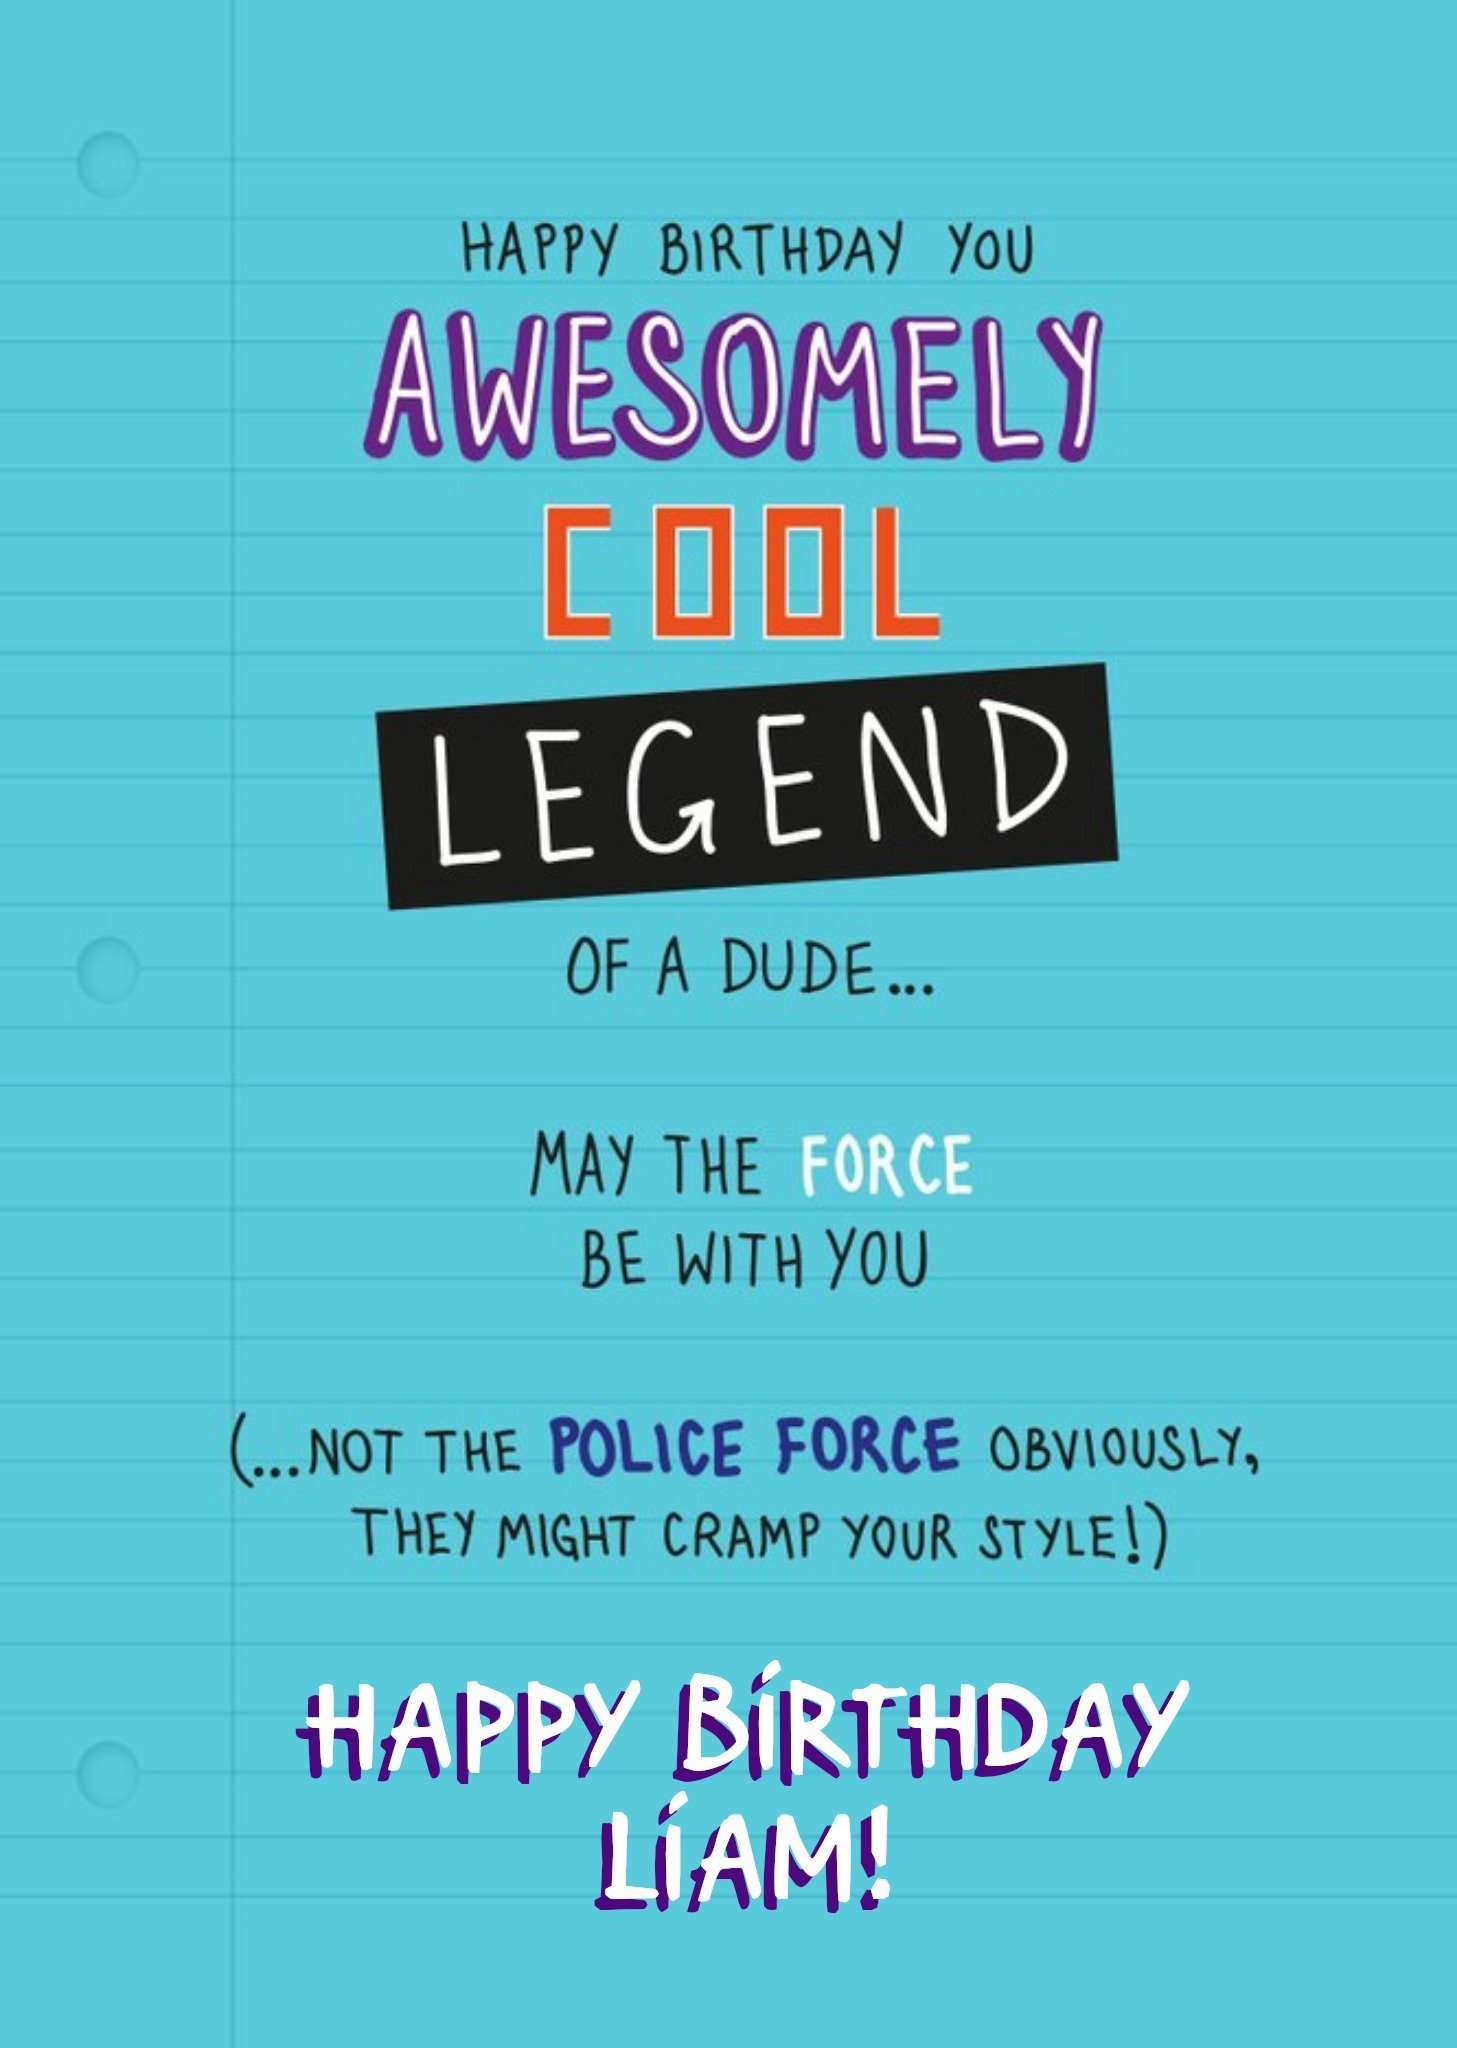 Moonpig Awesomely Cool Legend Of A Dude Personalised Card Ecard